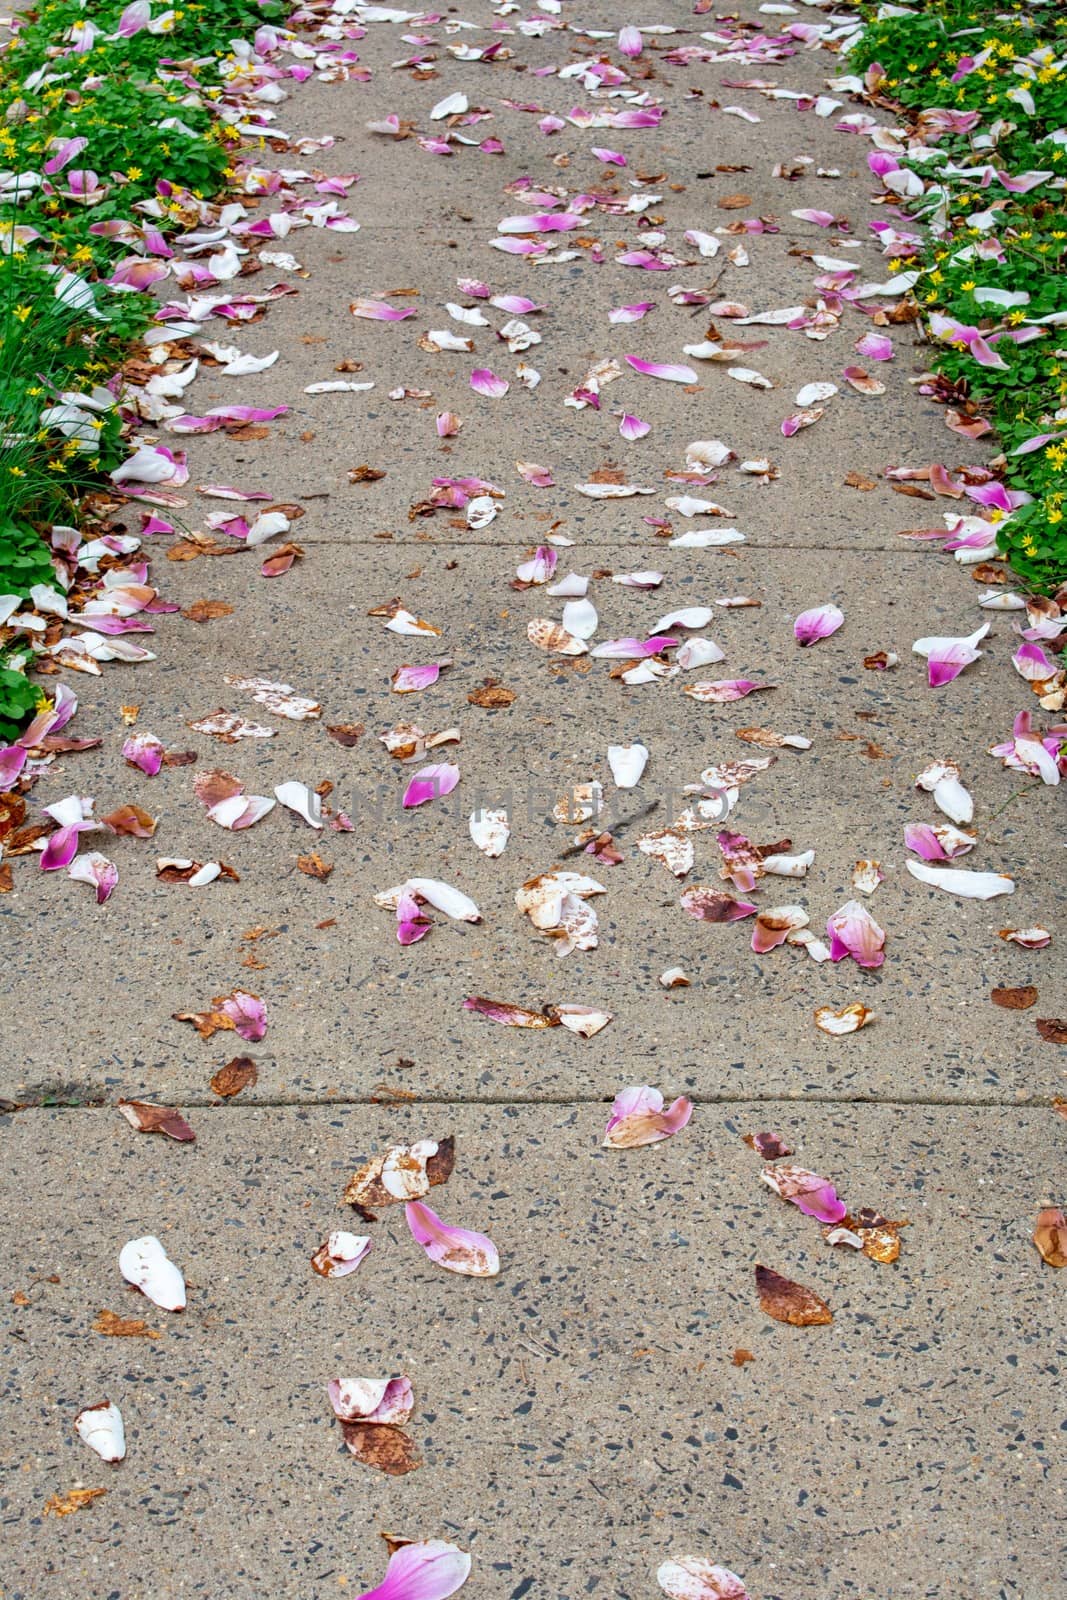 A Sidewalk Covered in Small Pink and White Petals During the Spring